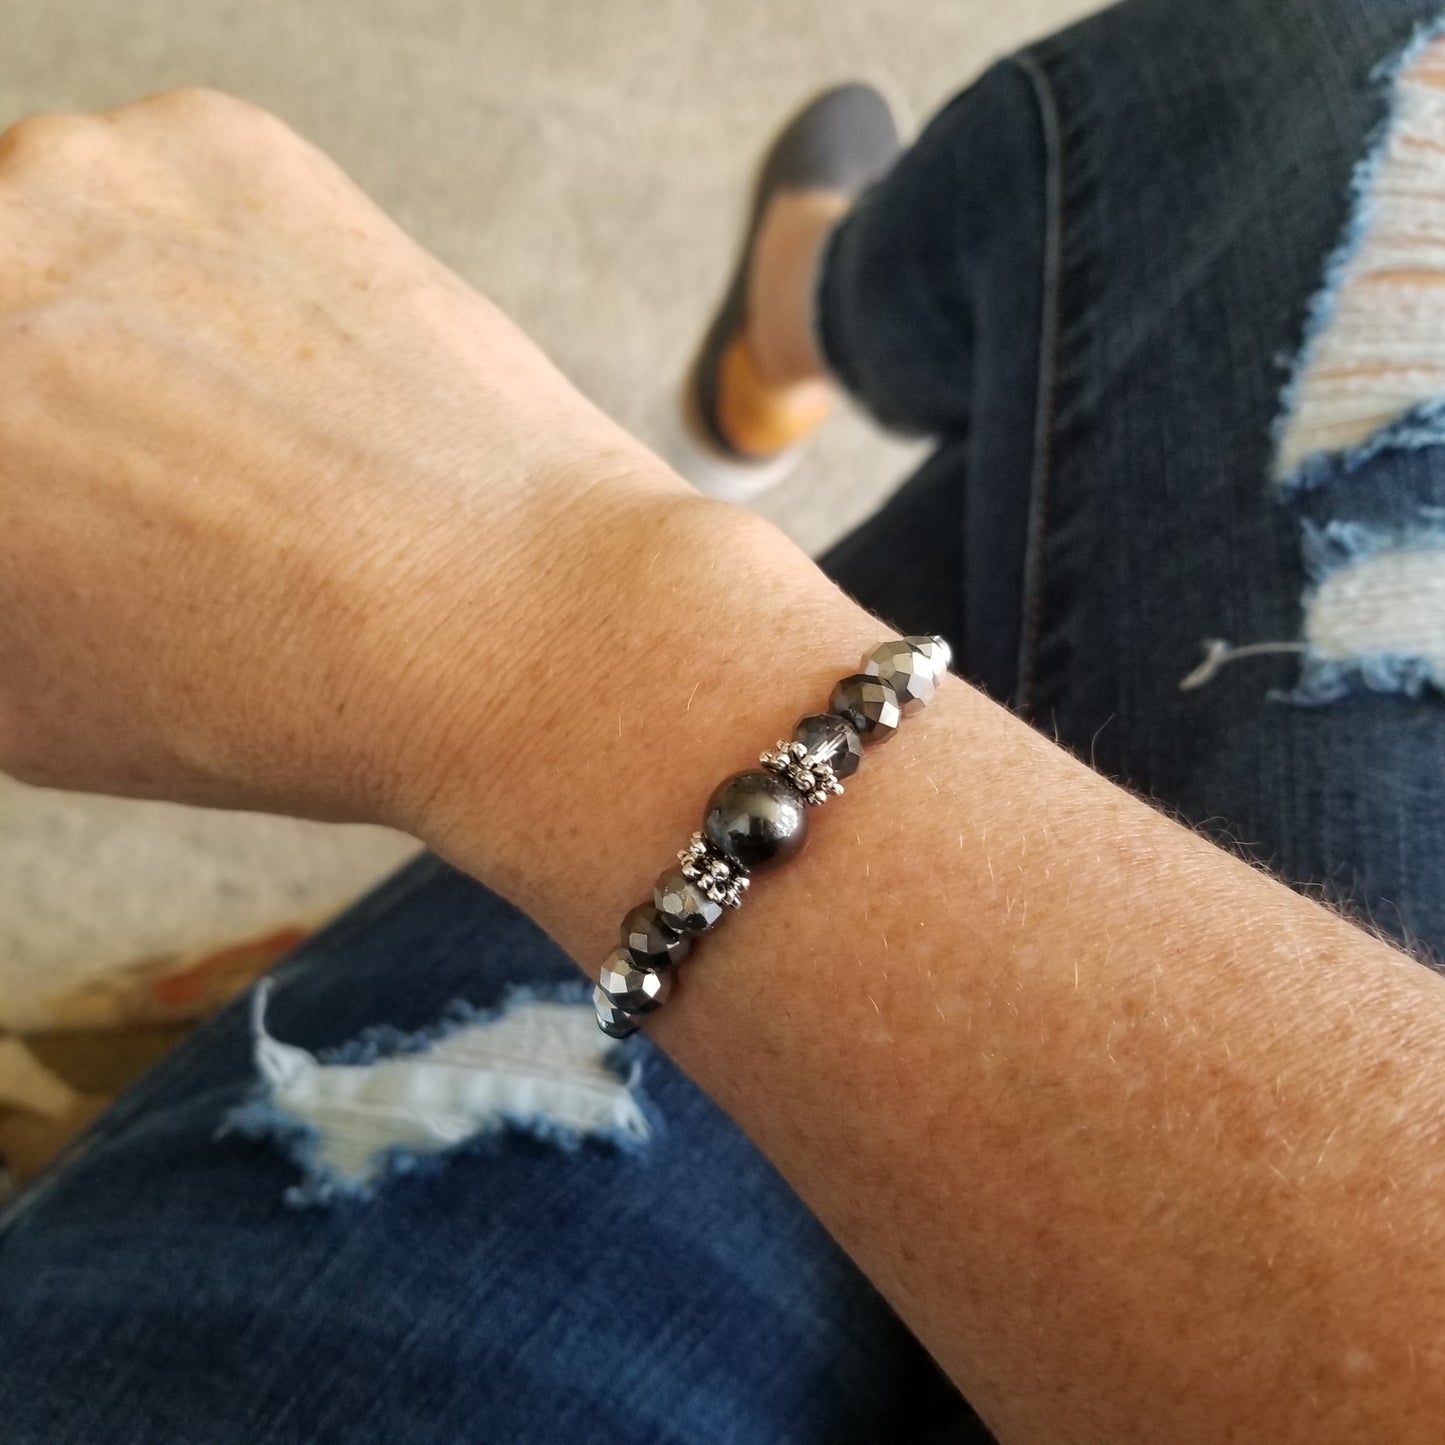 hematite and faceted glass wrap bracelet on wrist